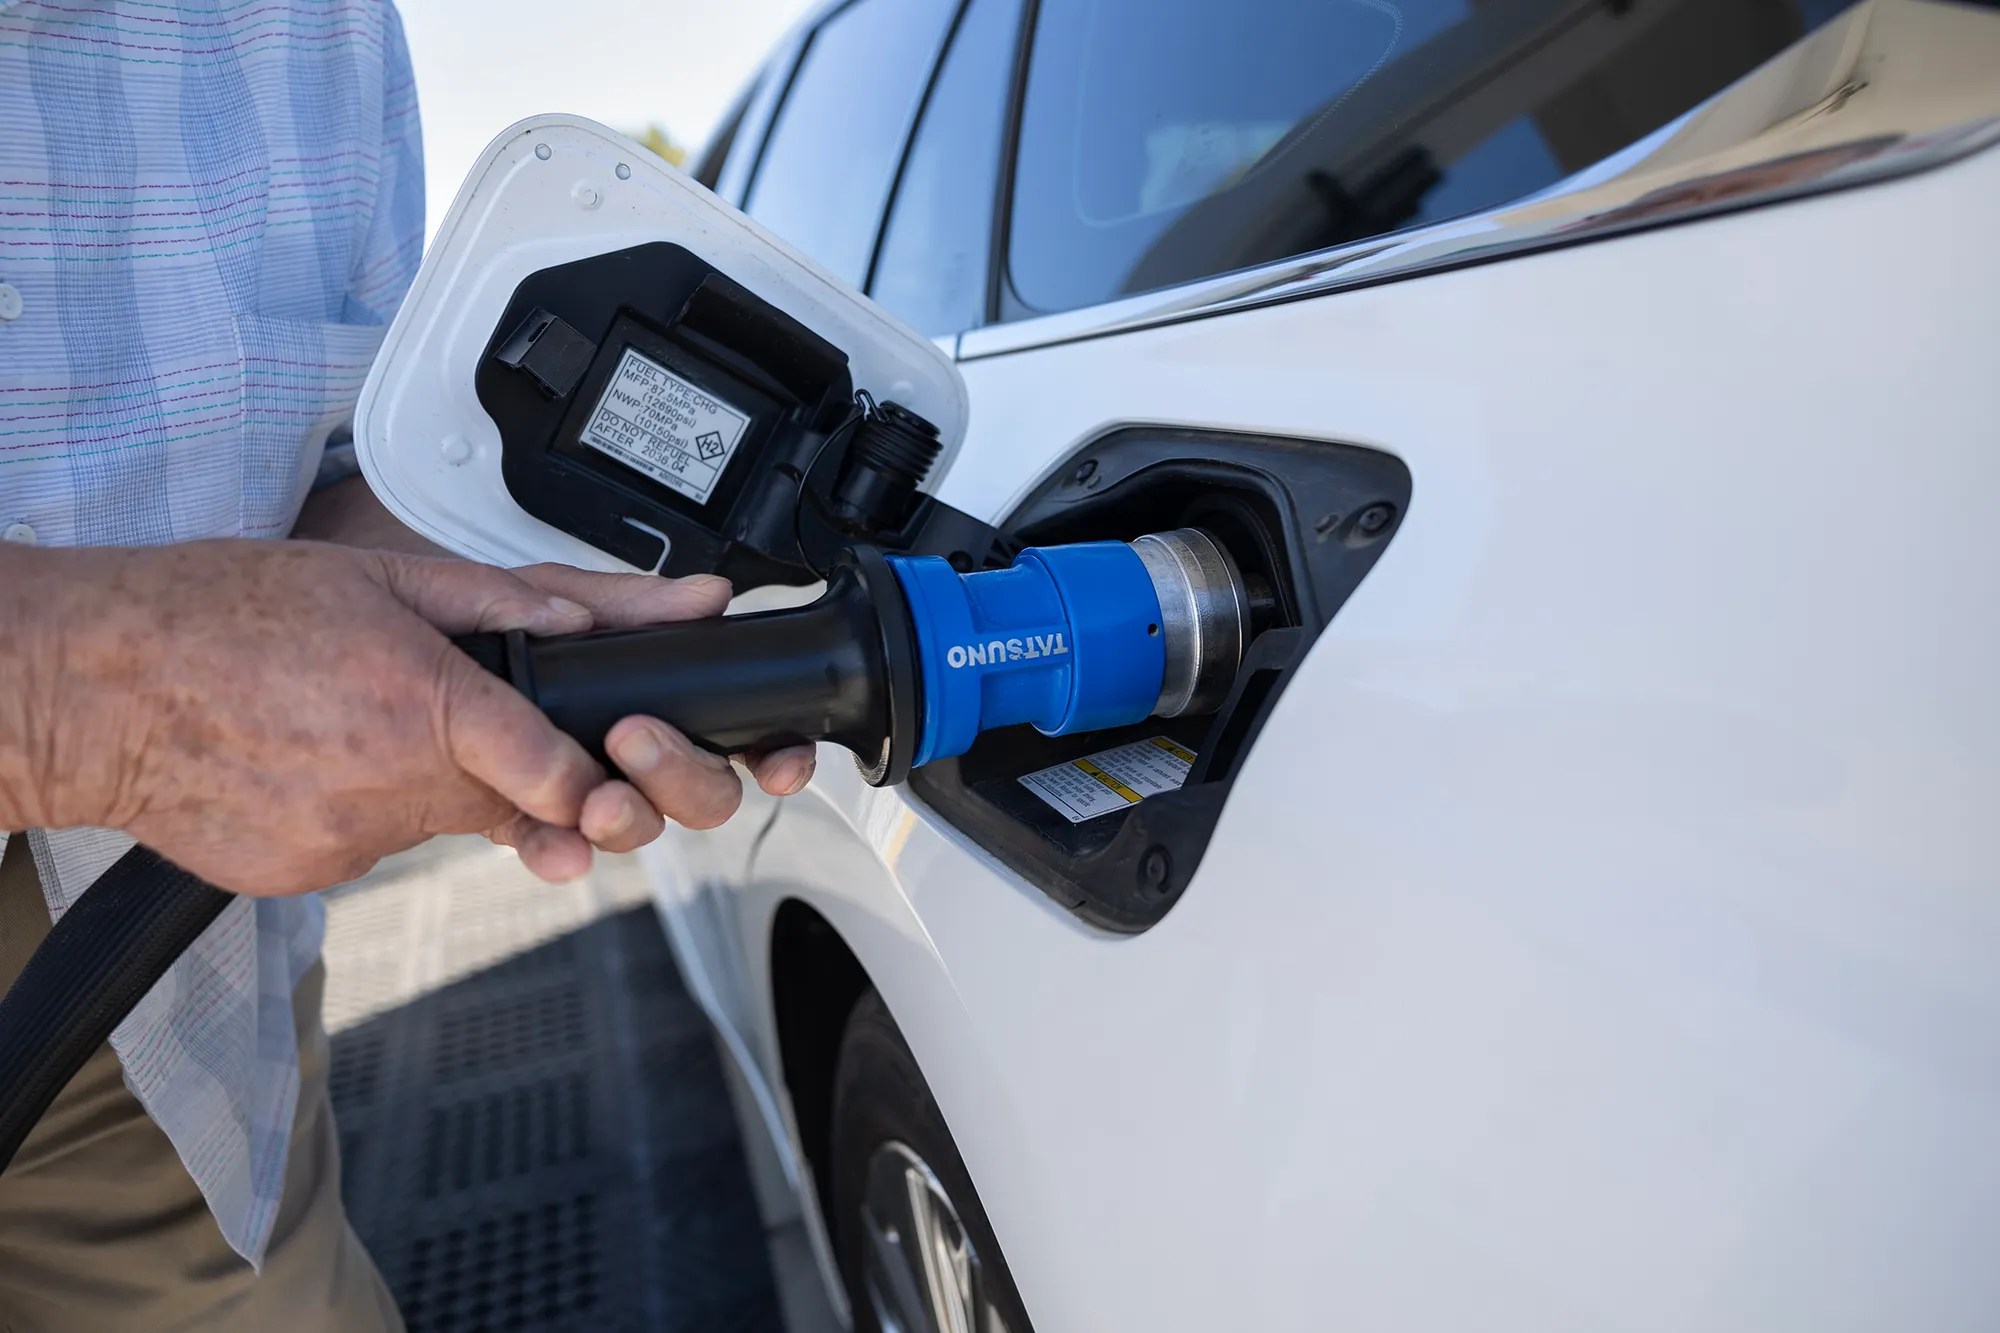 California may spend up to $300M for hydrogen car fuel stations. Why?